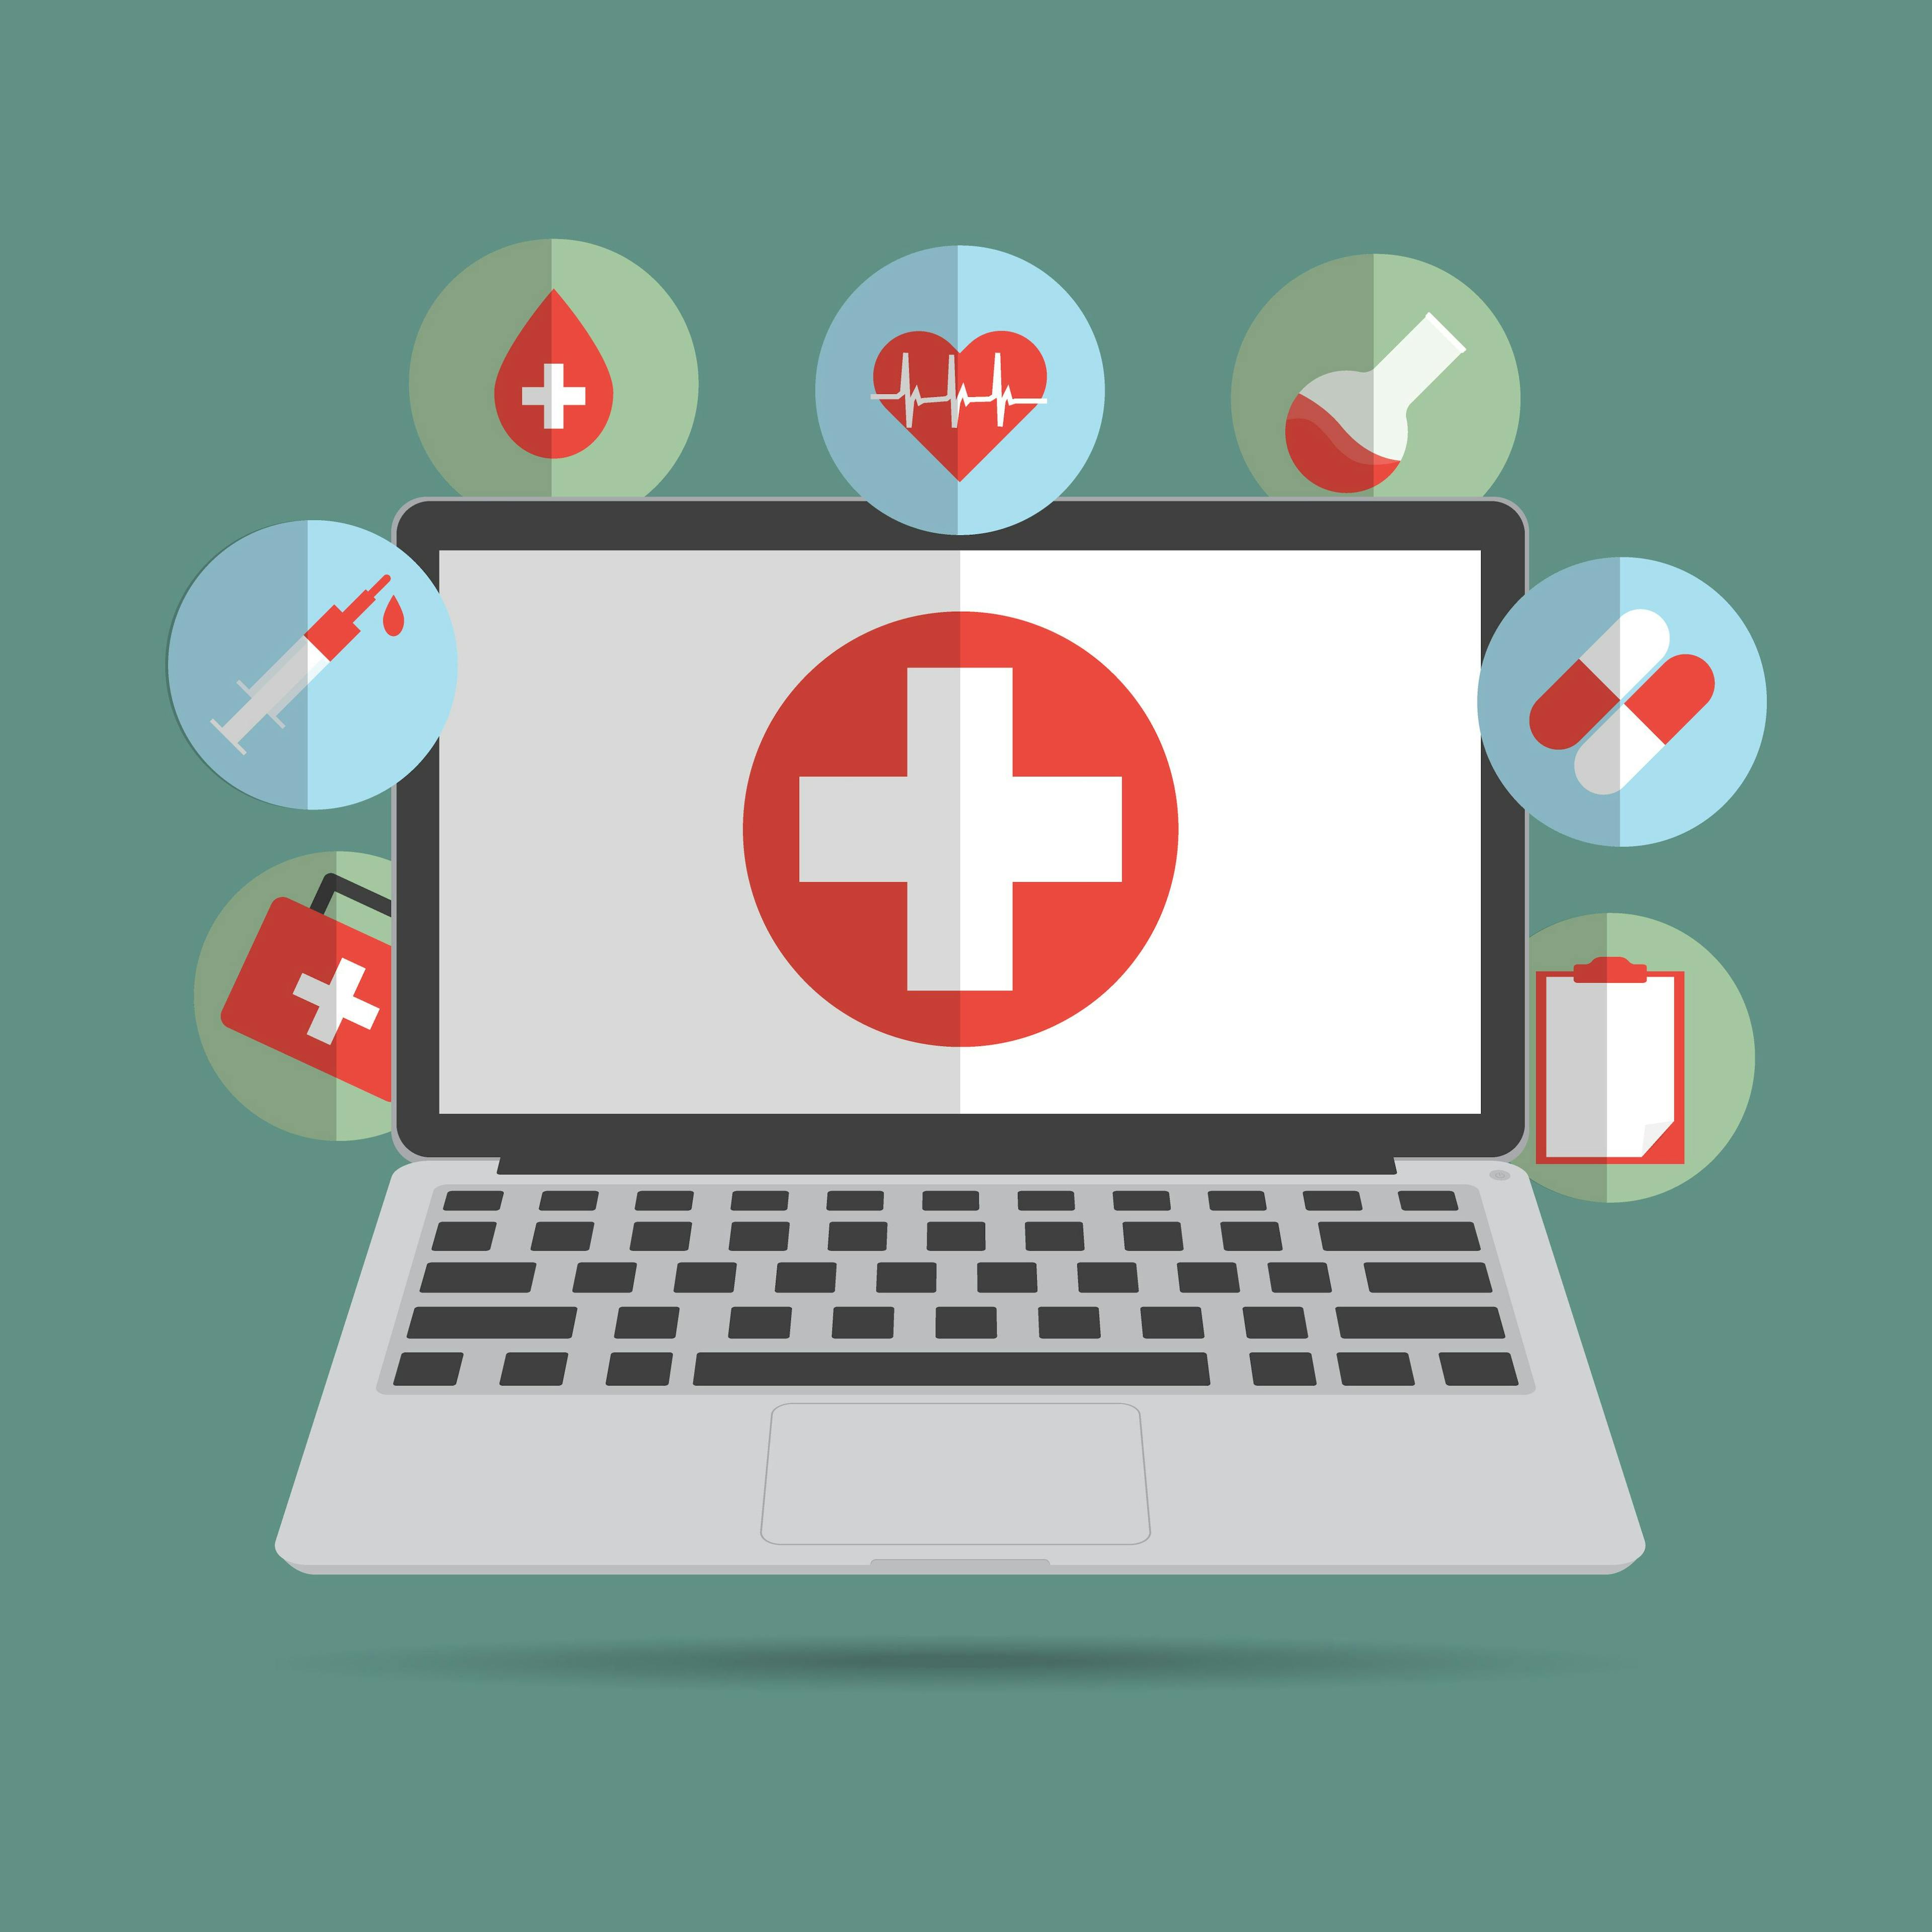 Medicare telehealth visits exceeded 52 million in 2020